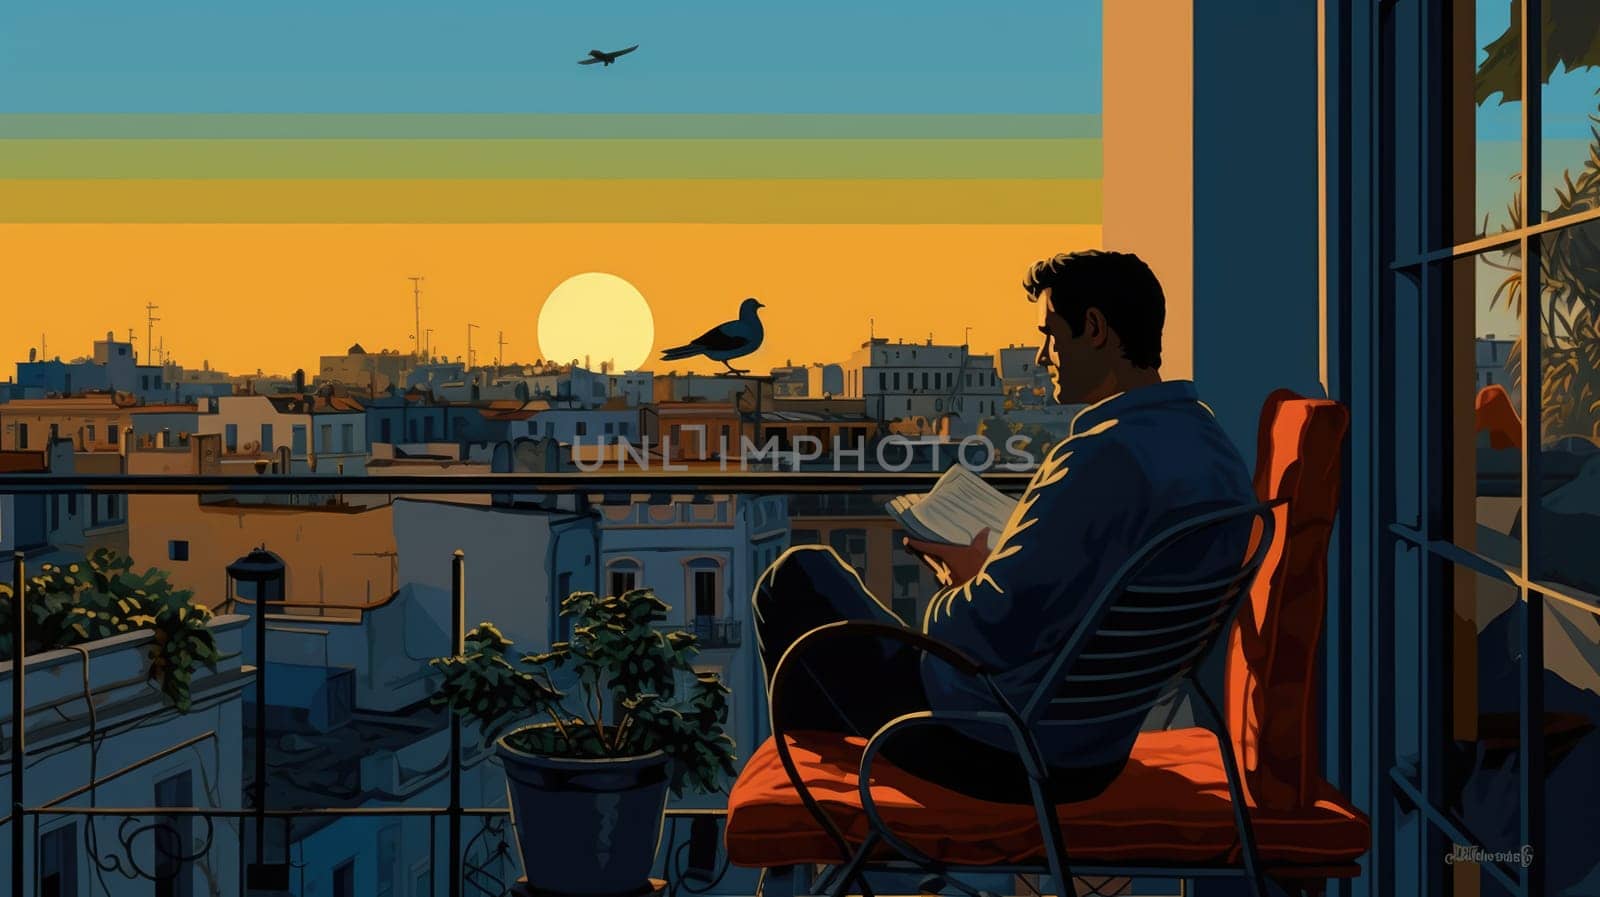 Birdwatching on the balcony watercolor illustration - AI generated. Parrot, man, balcony, buildings.